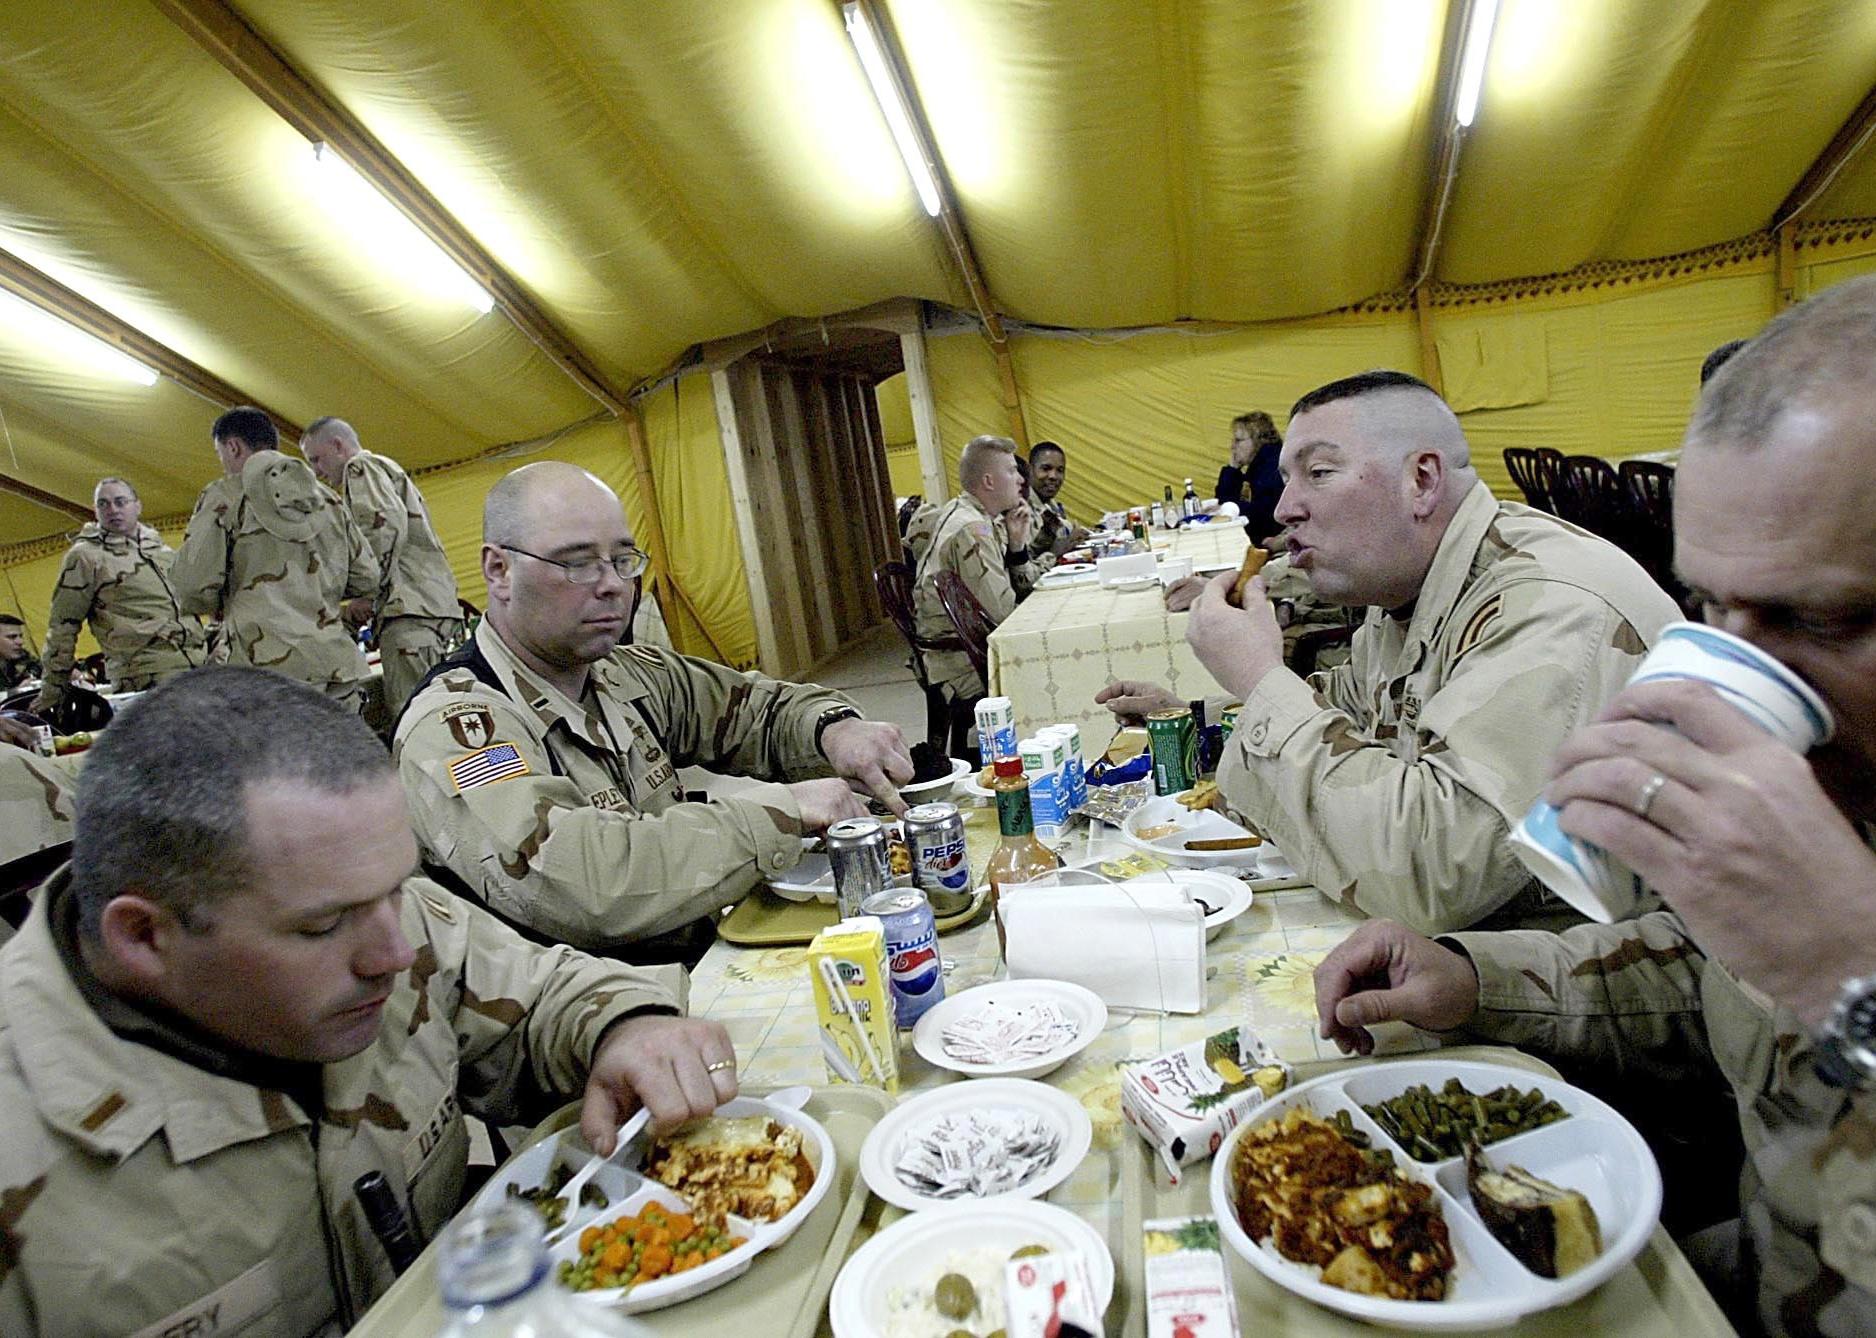 Soldiers eating in a large military tent.